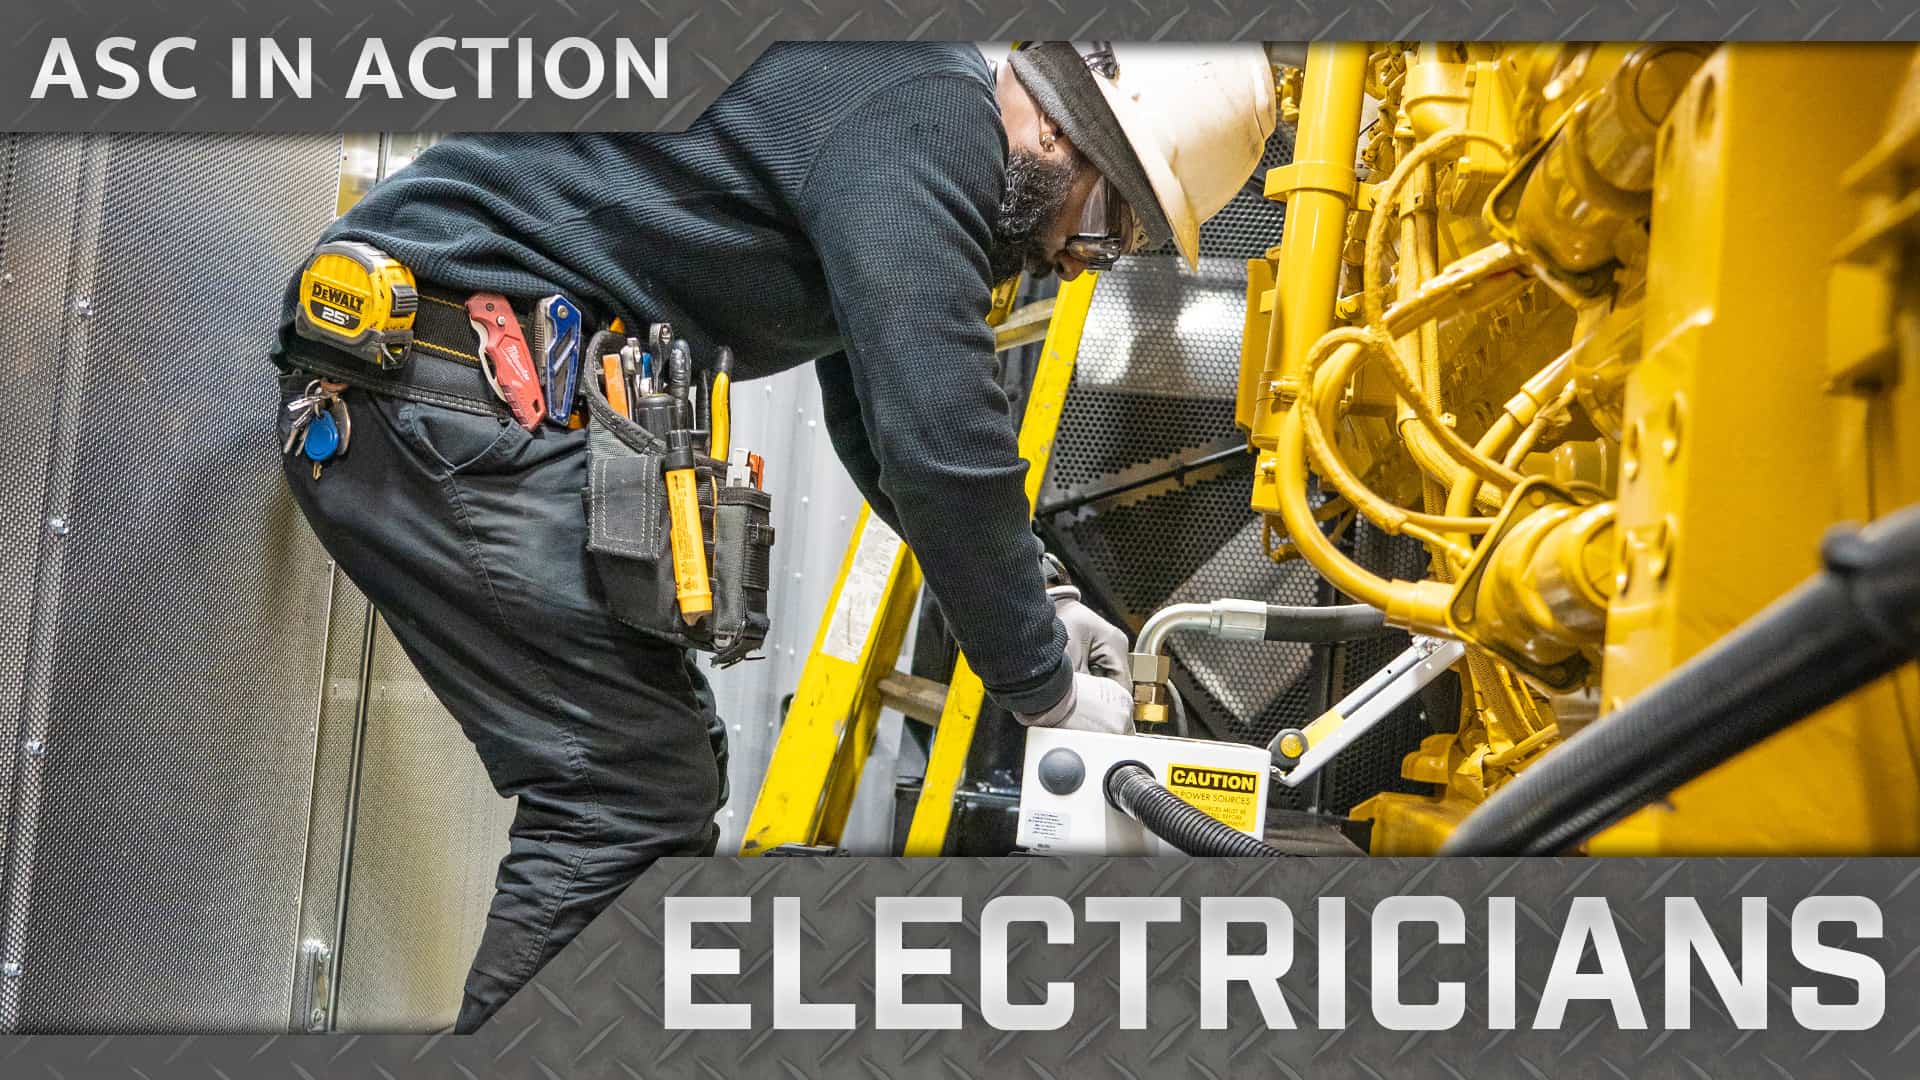 ASC in action electricians video thumnail